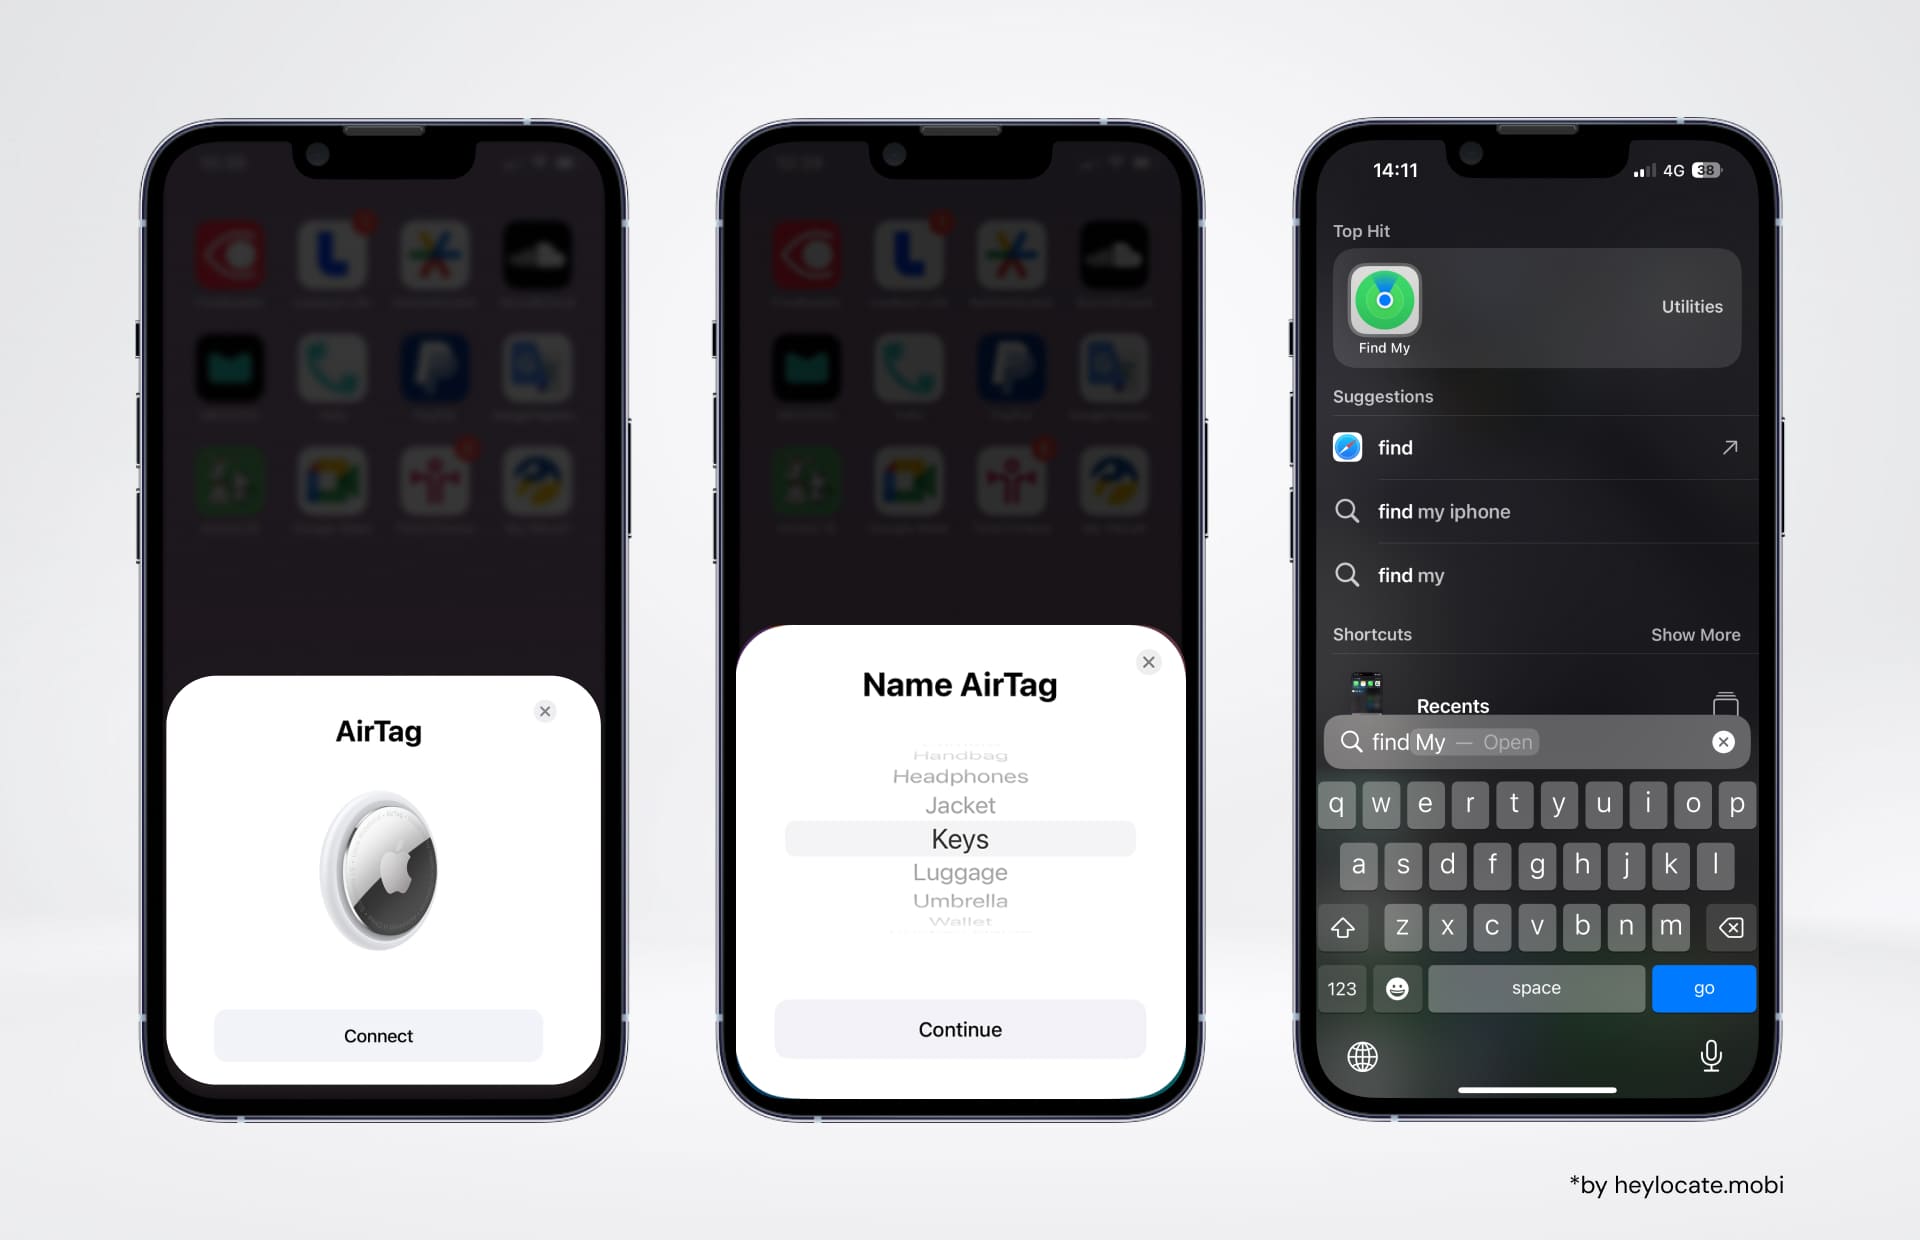 Three iPhones showing different stages of using Apple AirTag. The first one shows the connection to the AirTag, the second one shows the AirTag naming interface, and the third one shows the entrance to the Find My app